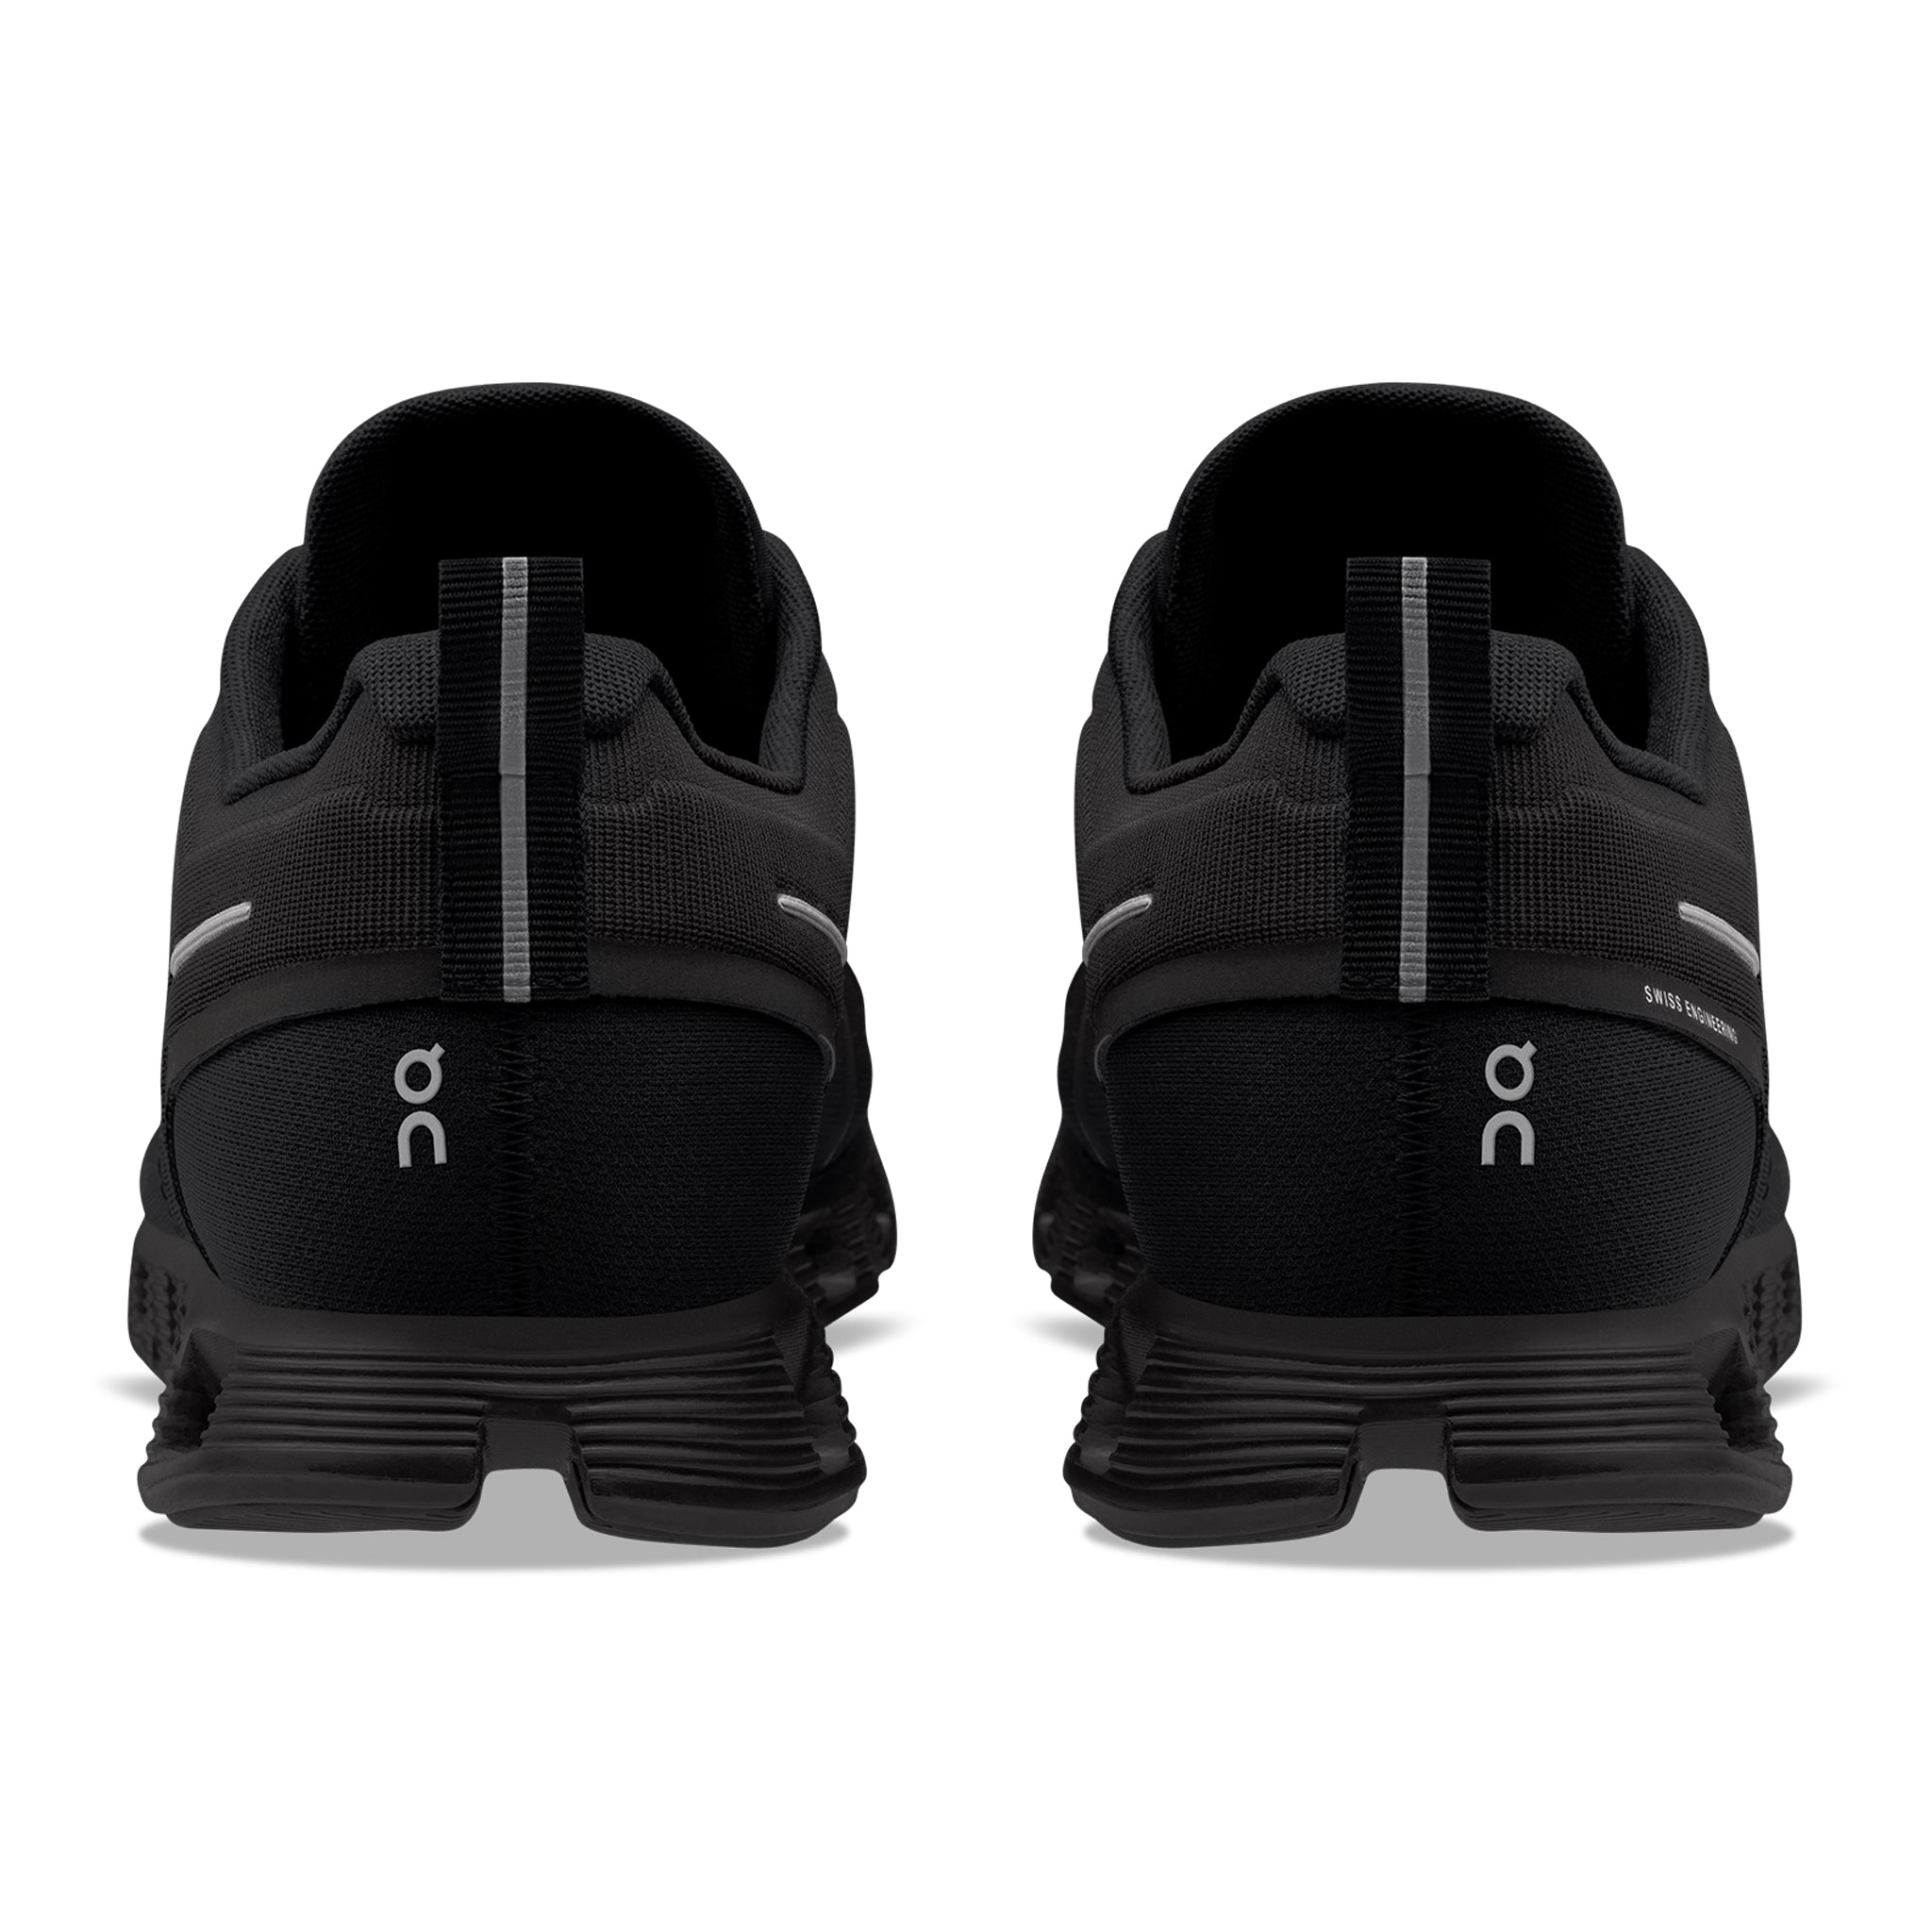 Back view of On Running Cloud 5 Waterproof All Black Shoes 59.98842